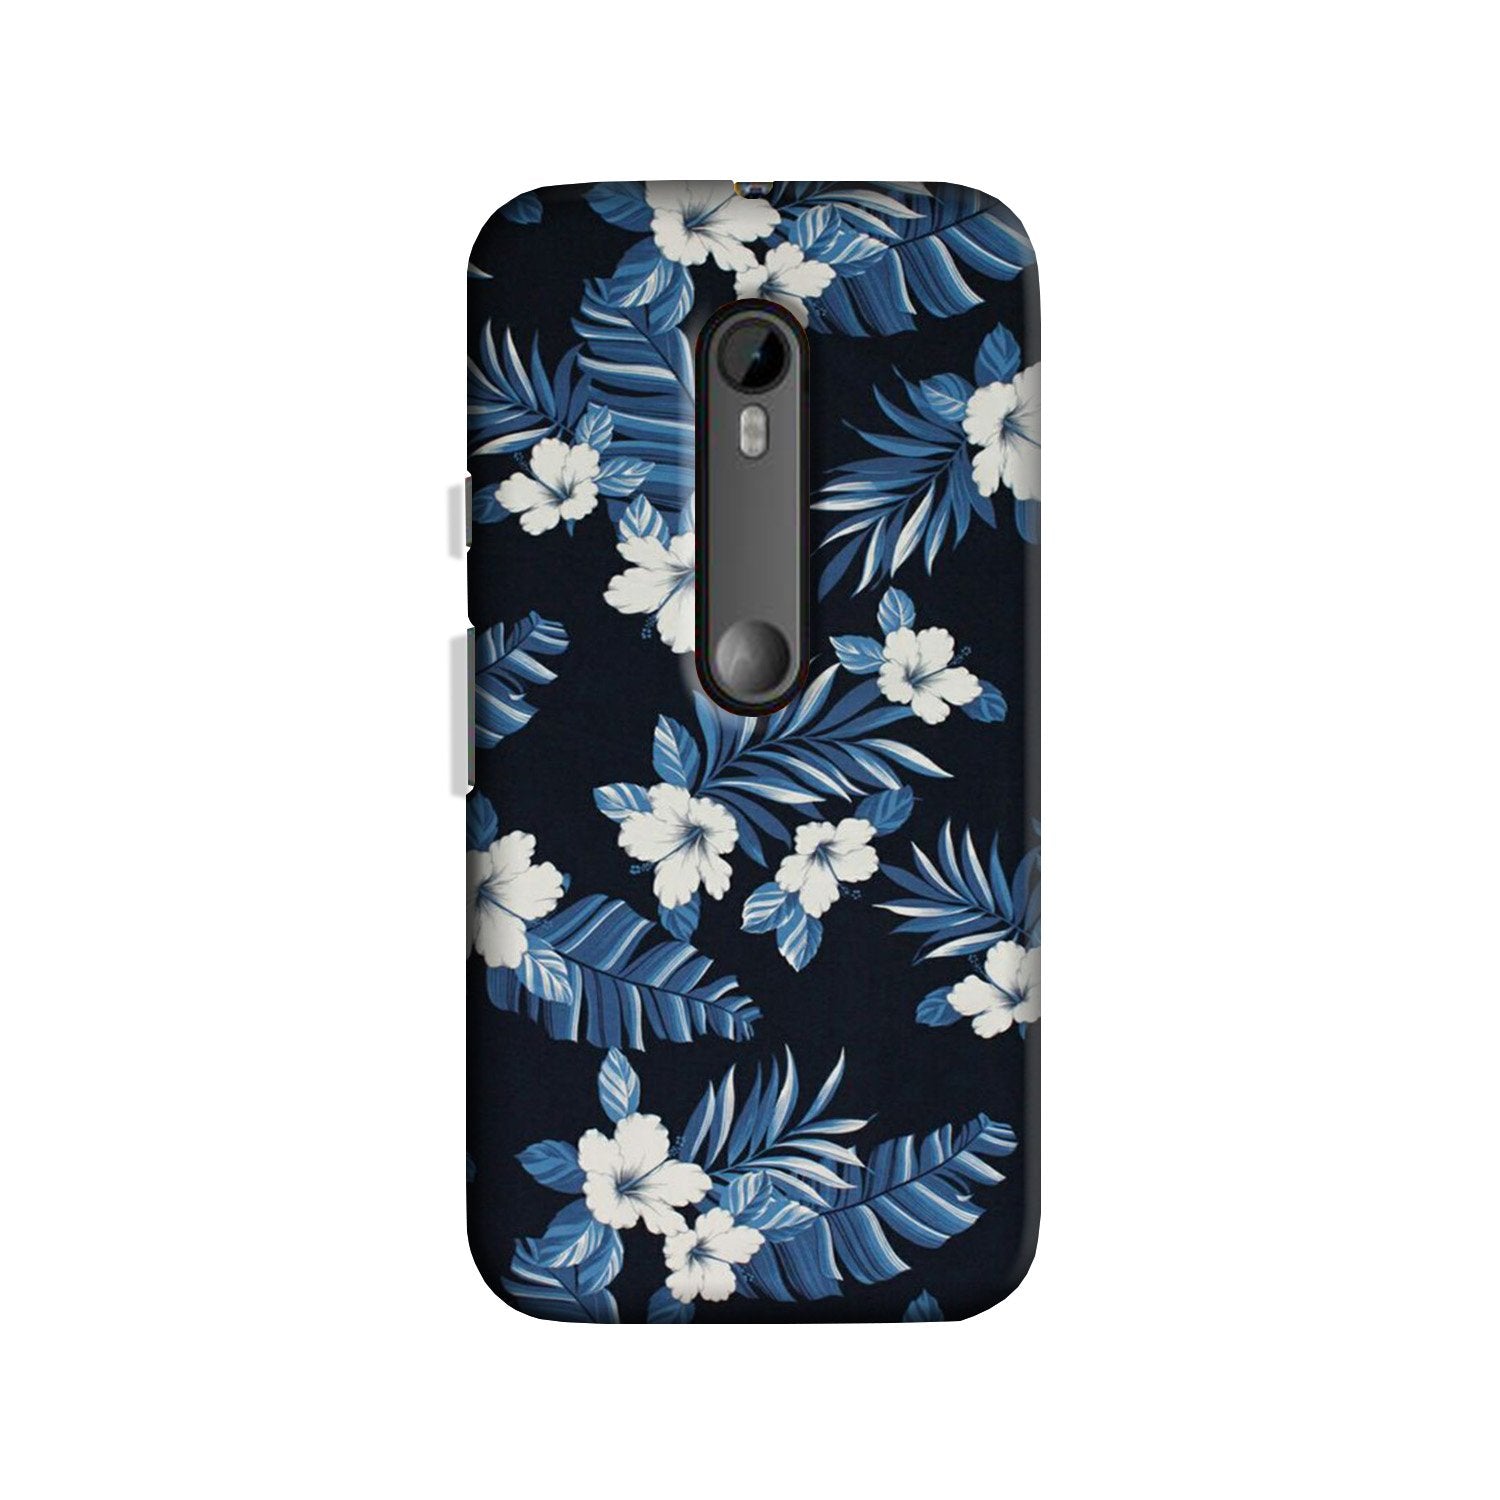 White flowers Blue Background2 Case for Moto X Play